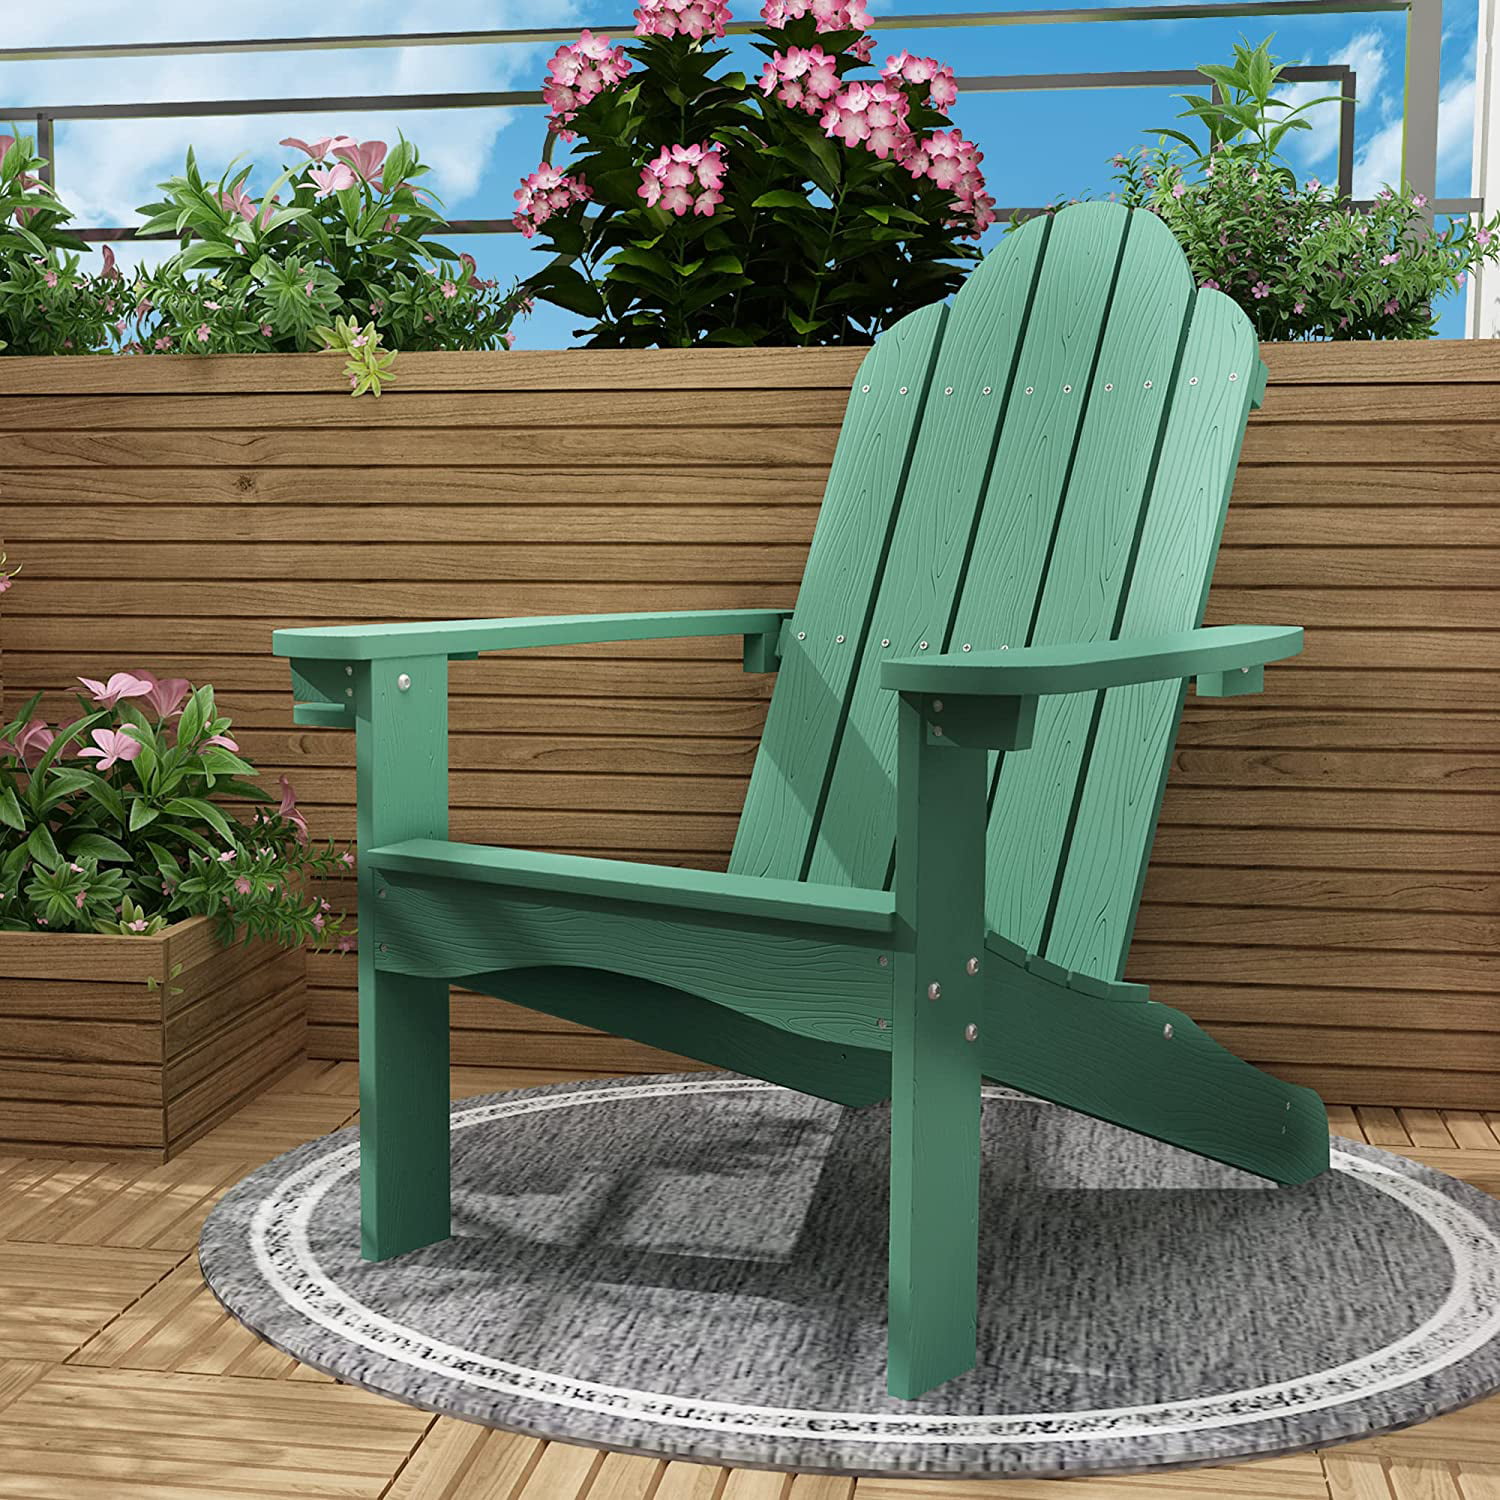 Outdoor Poly Lumber Cup Holder for Finch Seating Free Shipping 